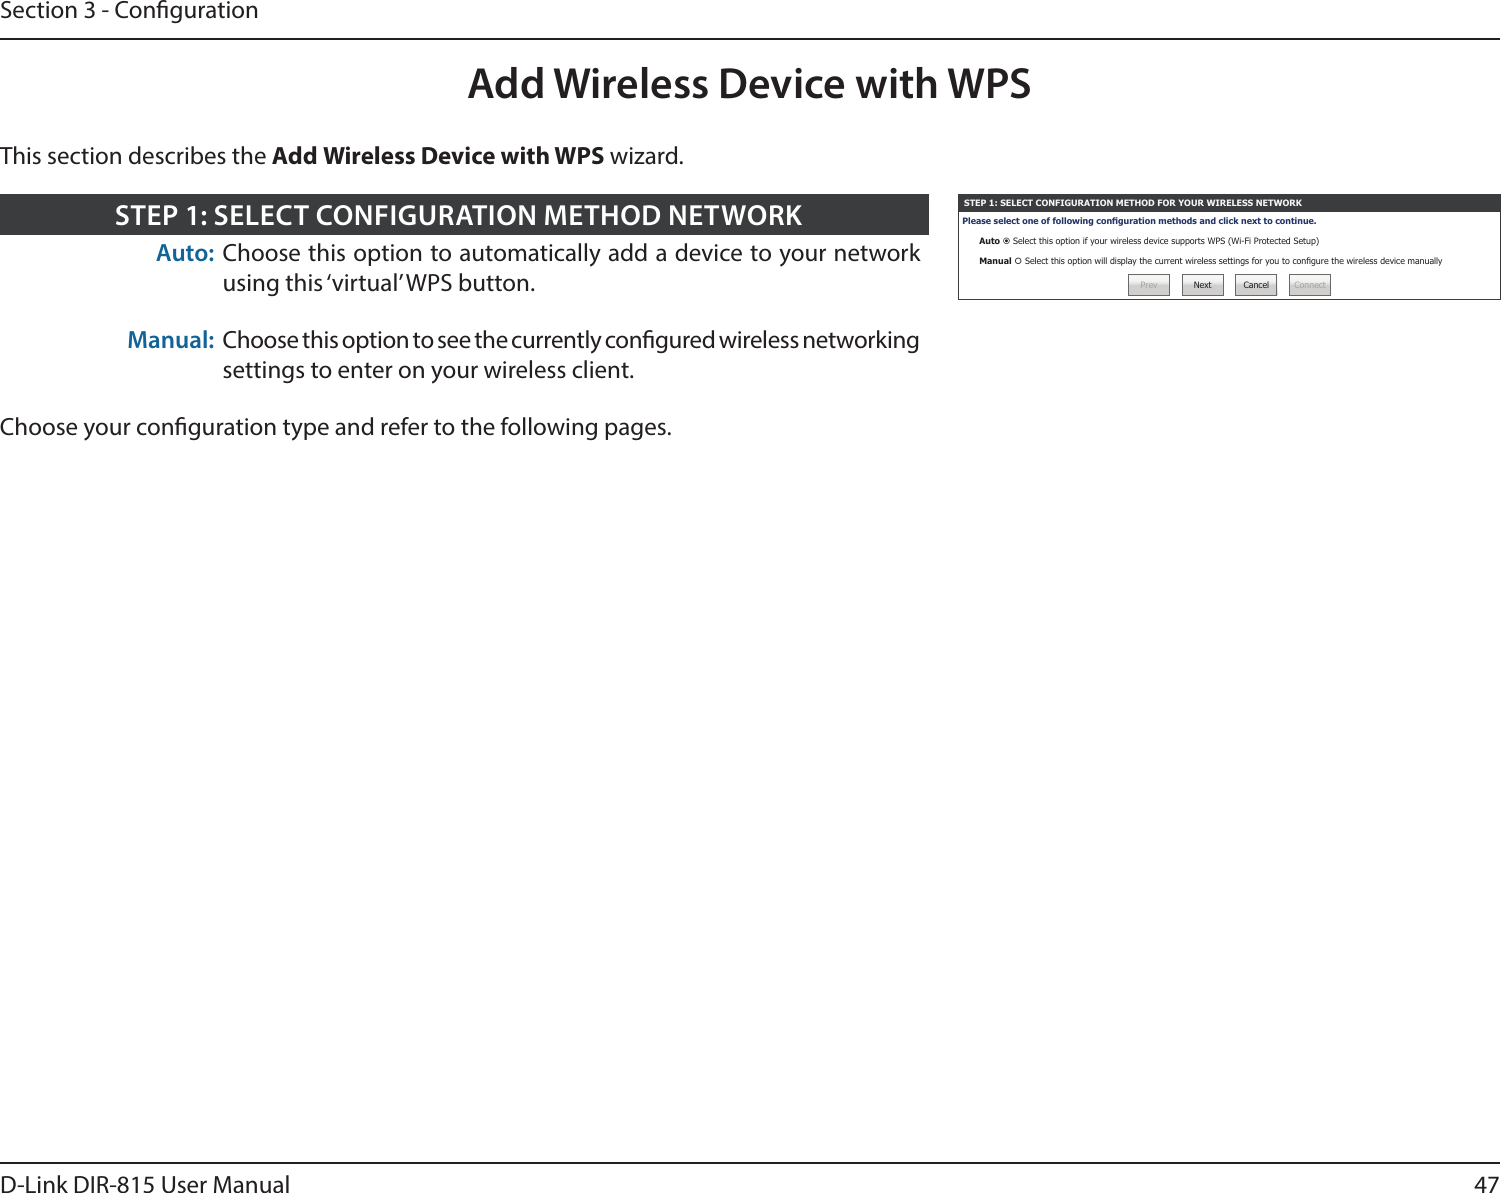 47D-Link DIR-815 User ManualSection 3 - CongurationAdd Wireless Device with WPSSTEP 1: SELECT CONFIGURATION METHOD FOR YOUR WIRELESS NETWORKPlease select one of following conguration methods and click next to continue.Auto  Select this option if your wireless device supports WPS (Wi-Fi Protected Setup)Manual  Select this option will display the current wireless settings for you to congure the wireless device manuallyPrev Next Cancel ConnectAuto: Choose this option to automatically add a device to your network using this ‘virtual’ WPS button.Manual: Choose this option to see the currently congured wireless networking settings to enter on your wireless client.Choose your conguration type and refer to the following pages.STEP 1: SELECT CONFIGURATION METHOD NETWORKThis section describes the Add Wireless Device with WPS wizard.